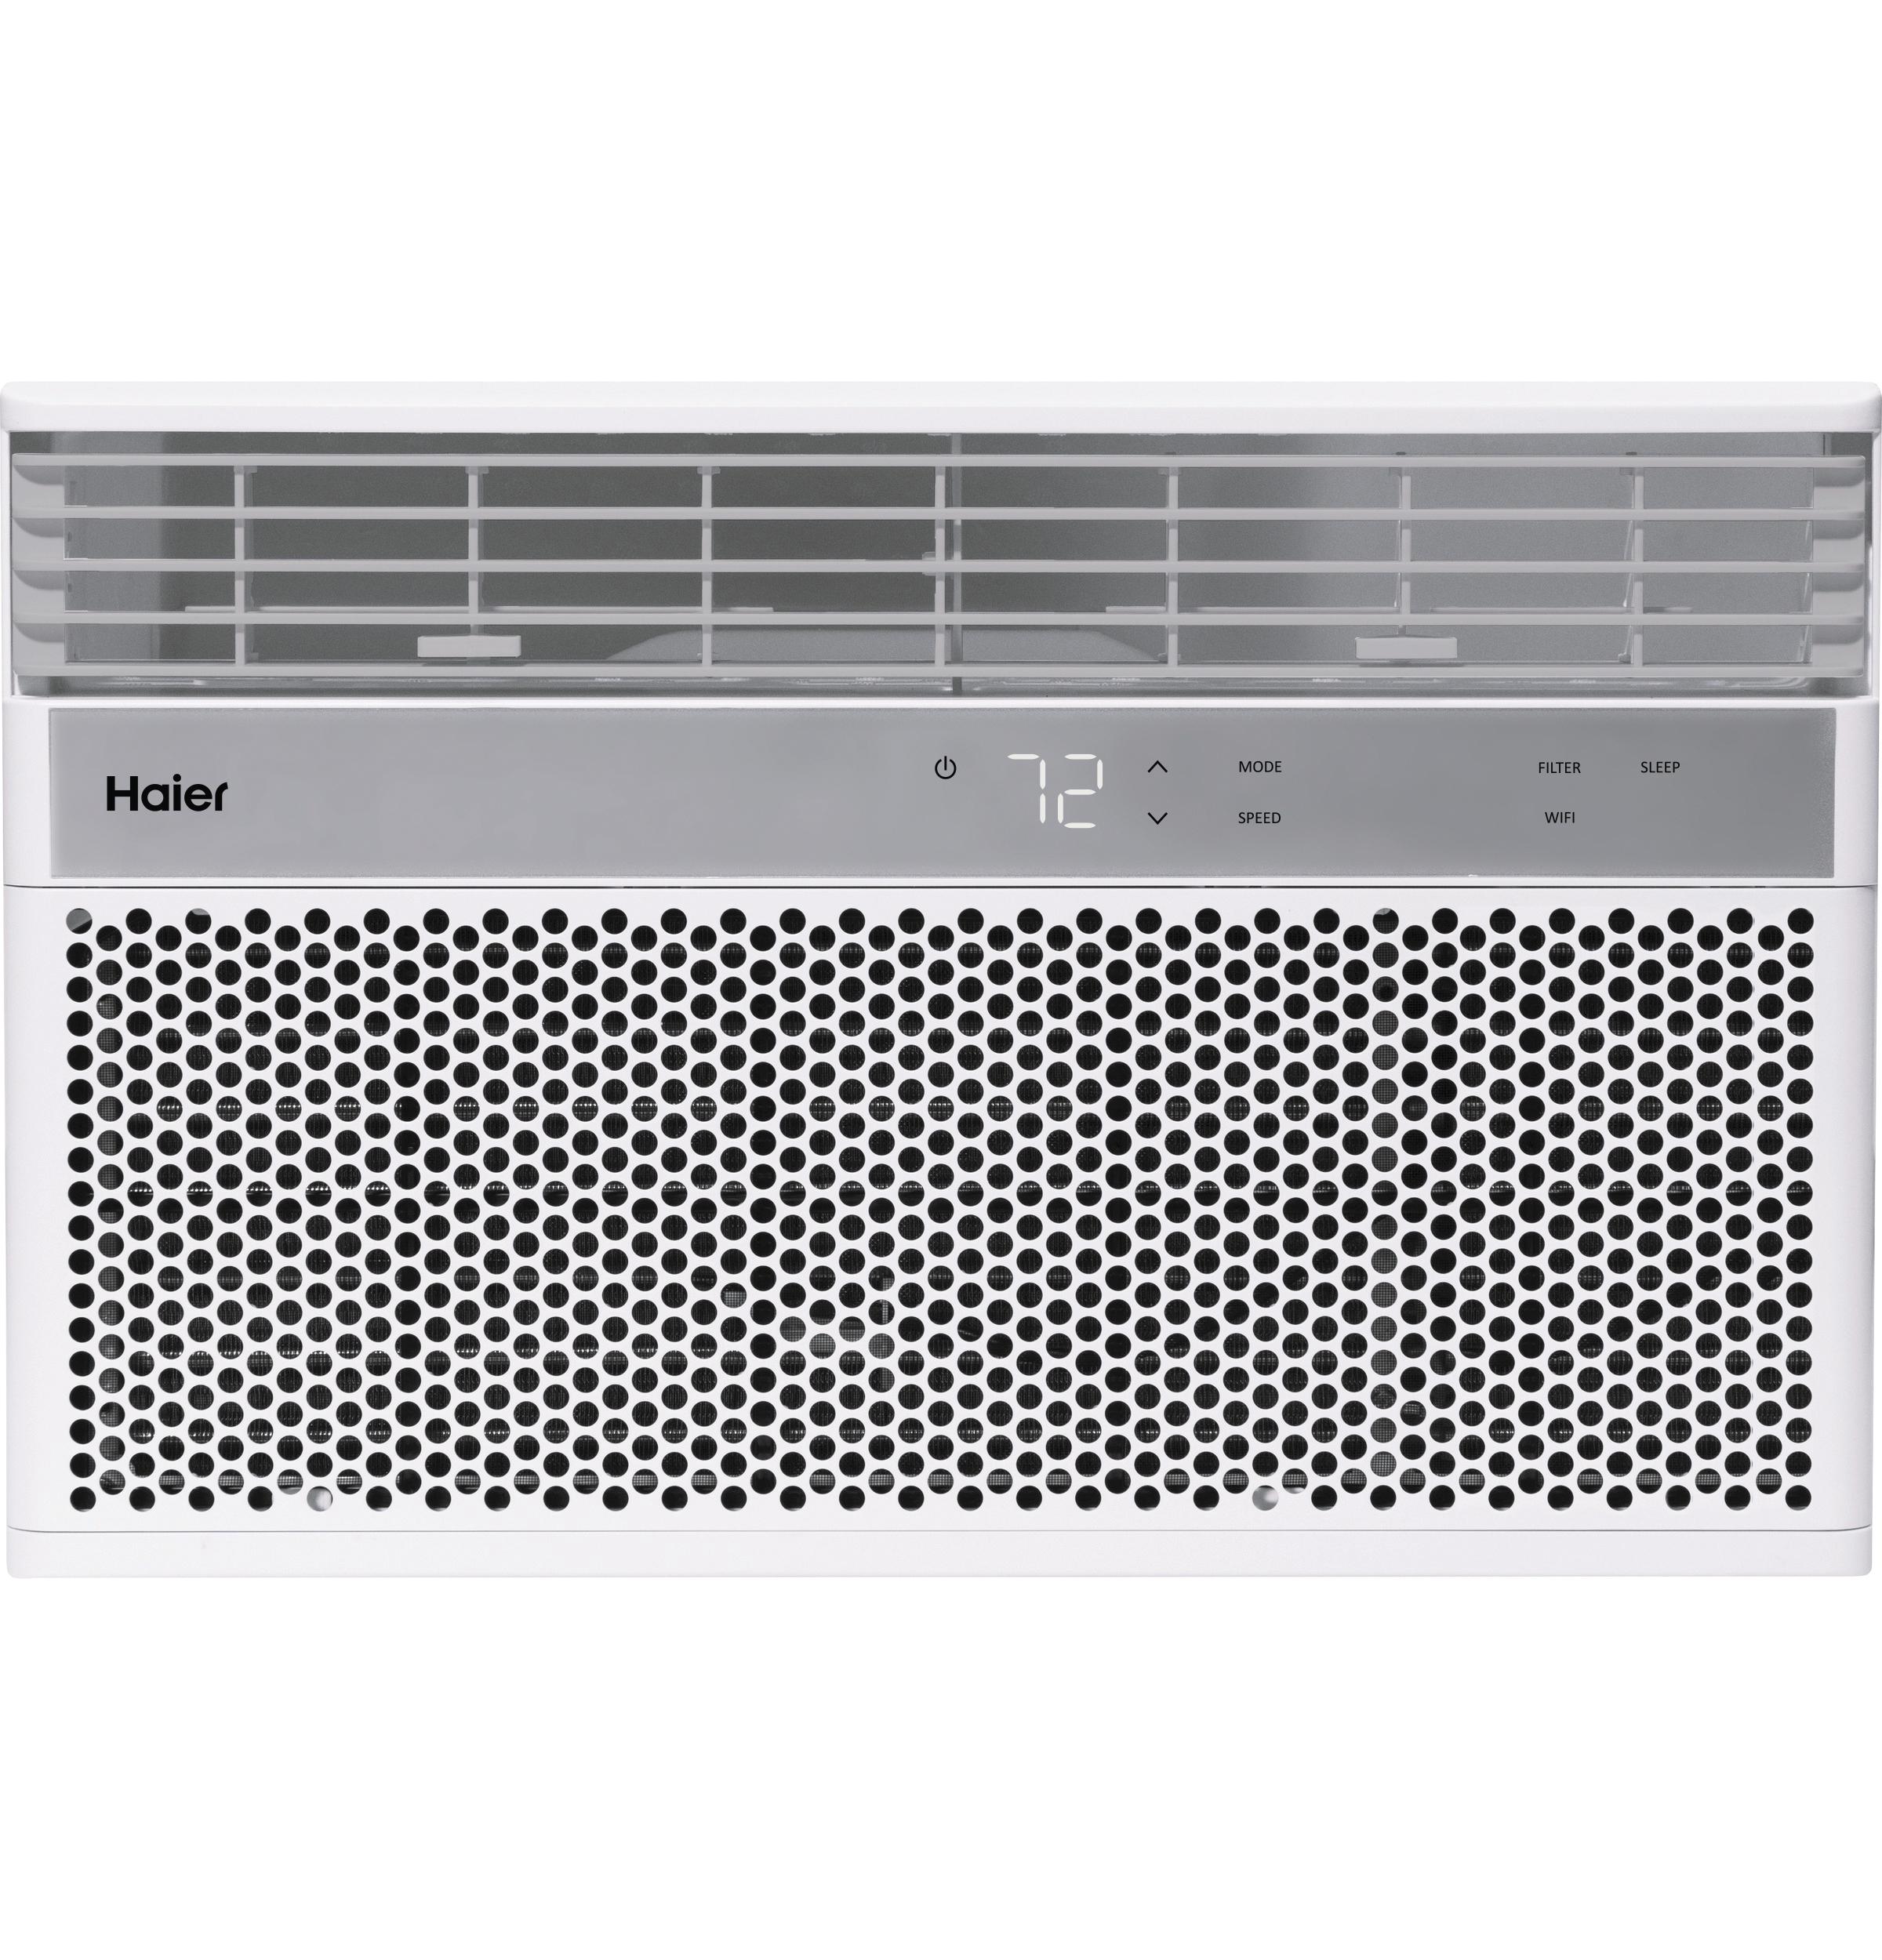 Haier QHNG08AA Haier 8,000 Btu Smart Electronic Window Air Conditioner For Medium Rooms Up To 350 Sq. Ft.